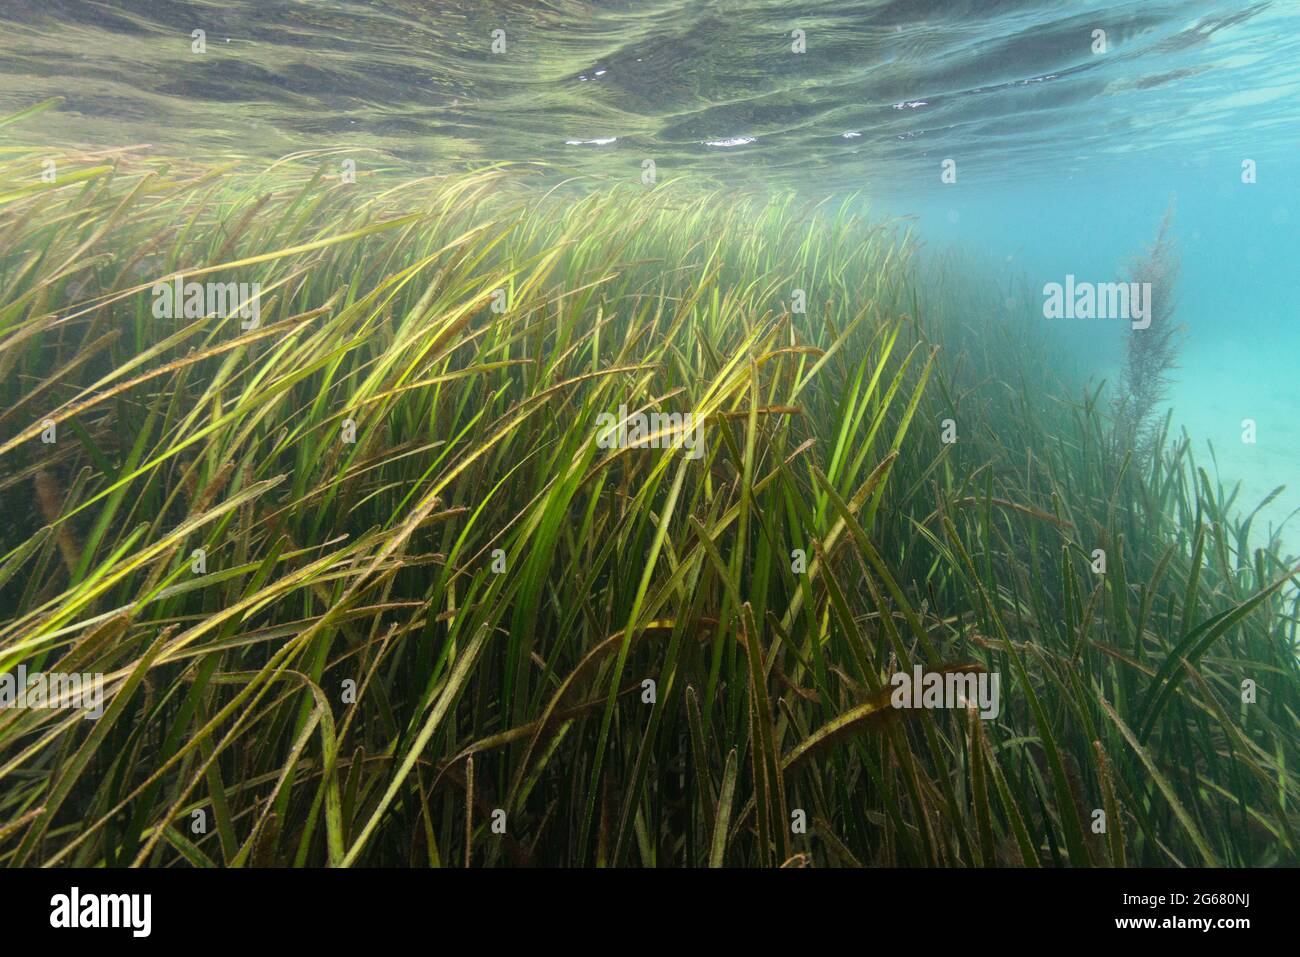 Seagrass meadow in shallow sea, Channel Islands, UK. Stock Photo